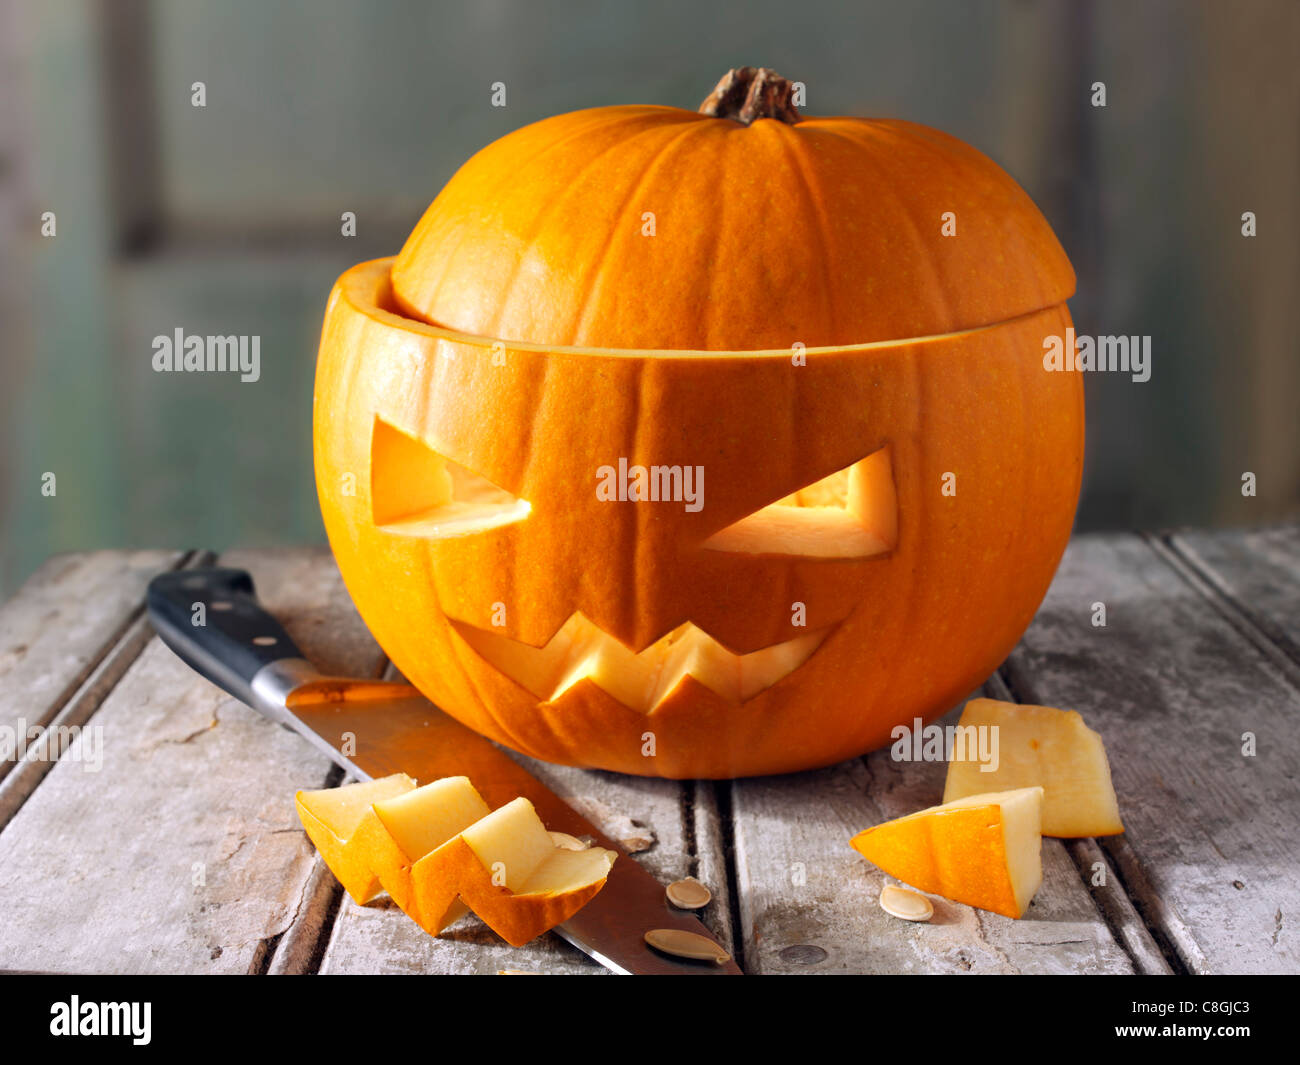 Pumpkin with a traditional Haloween carved face Stock Photo